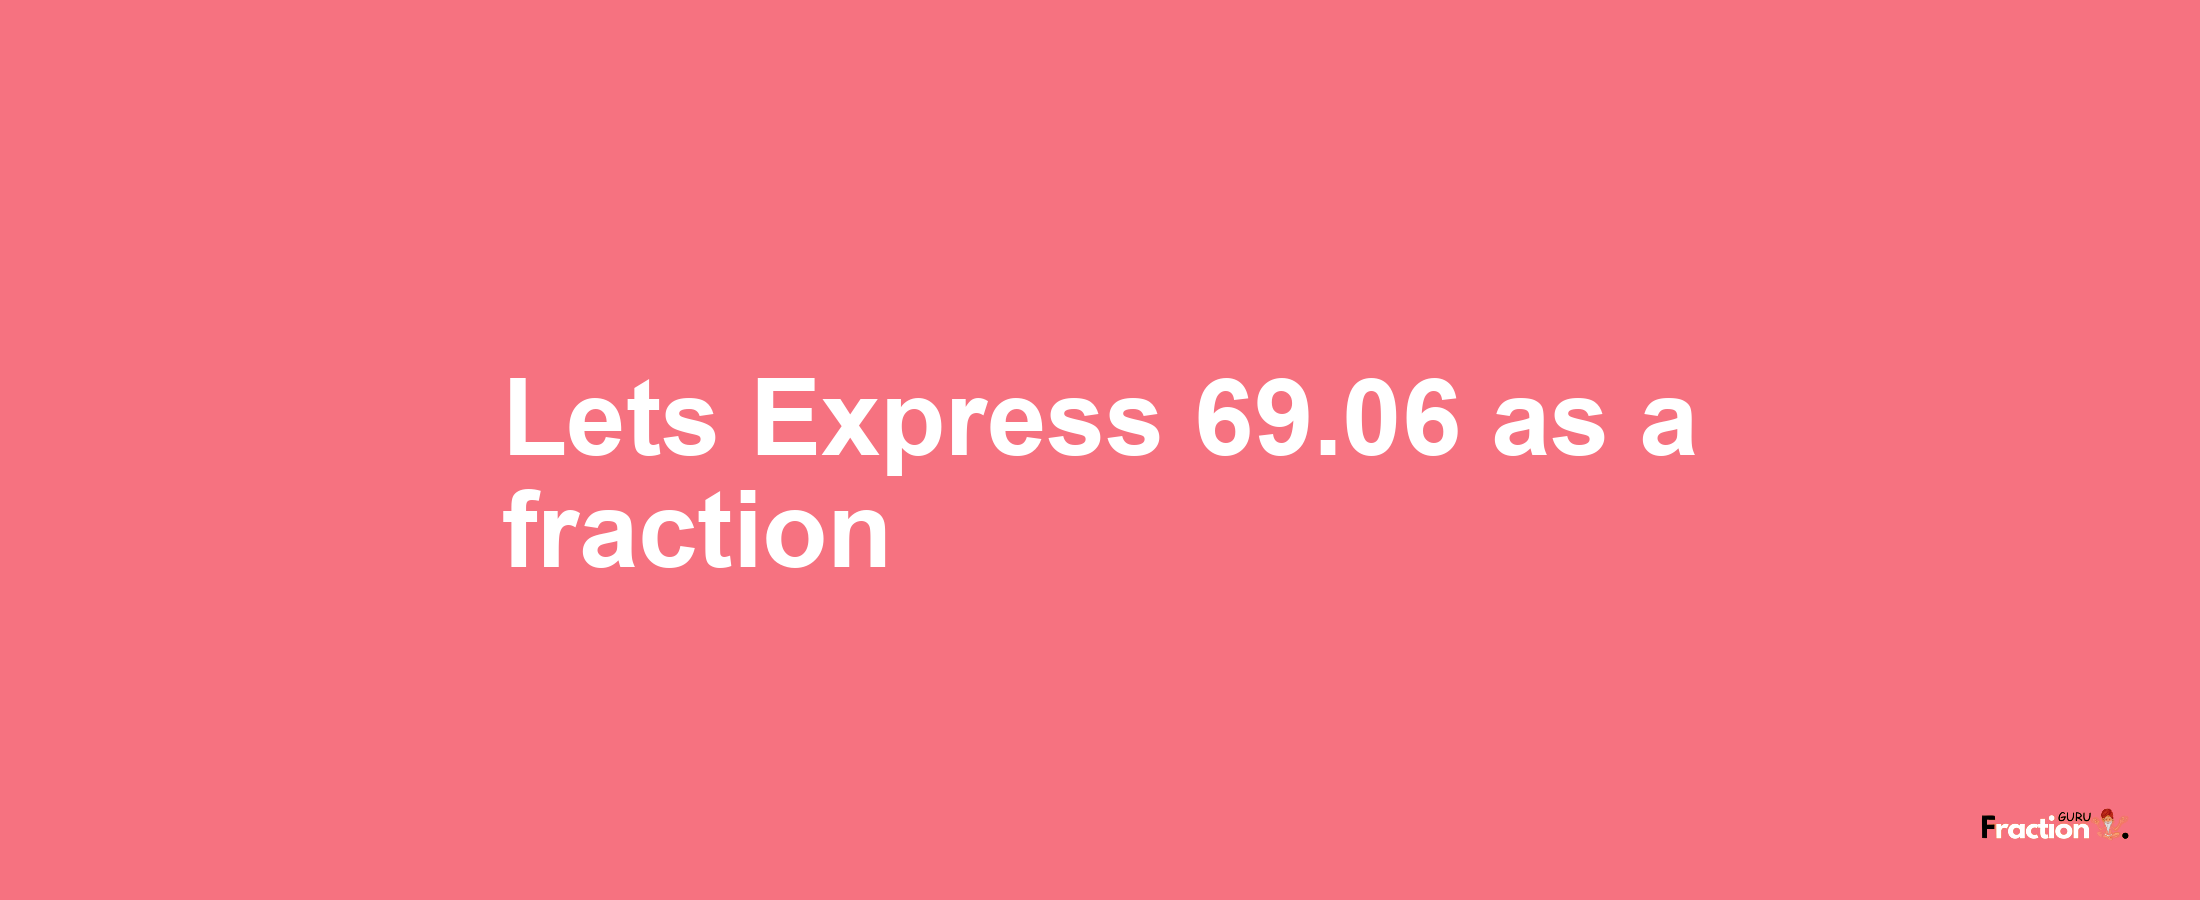 Lets Express 69.06 as afraction